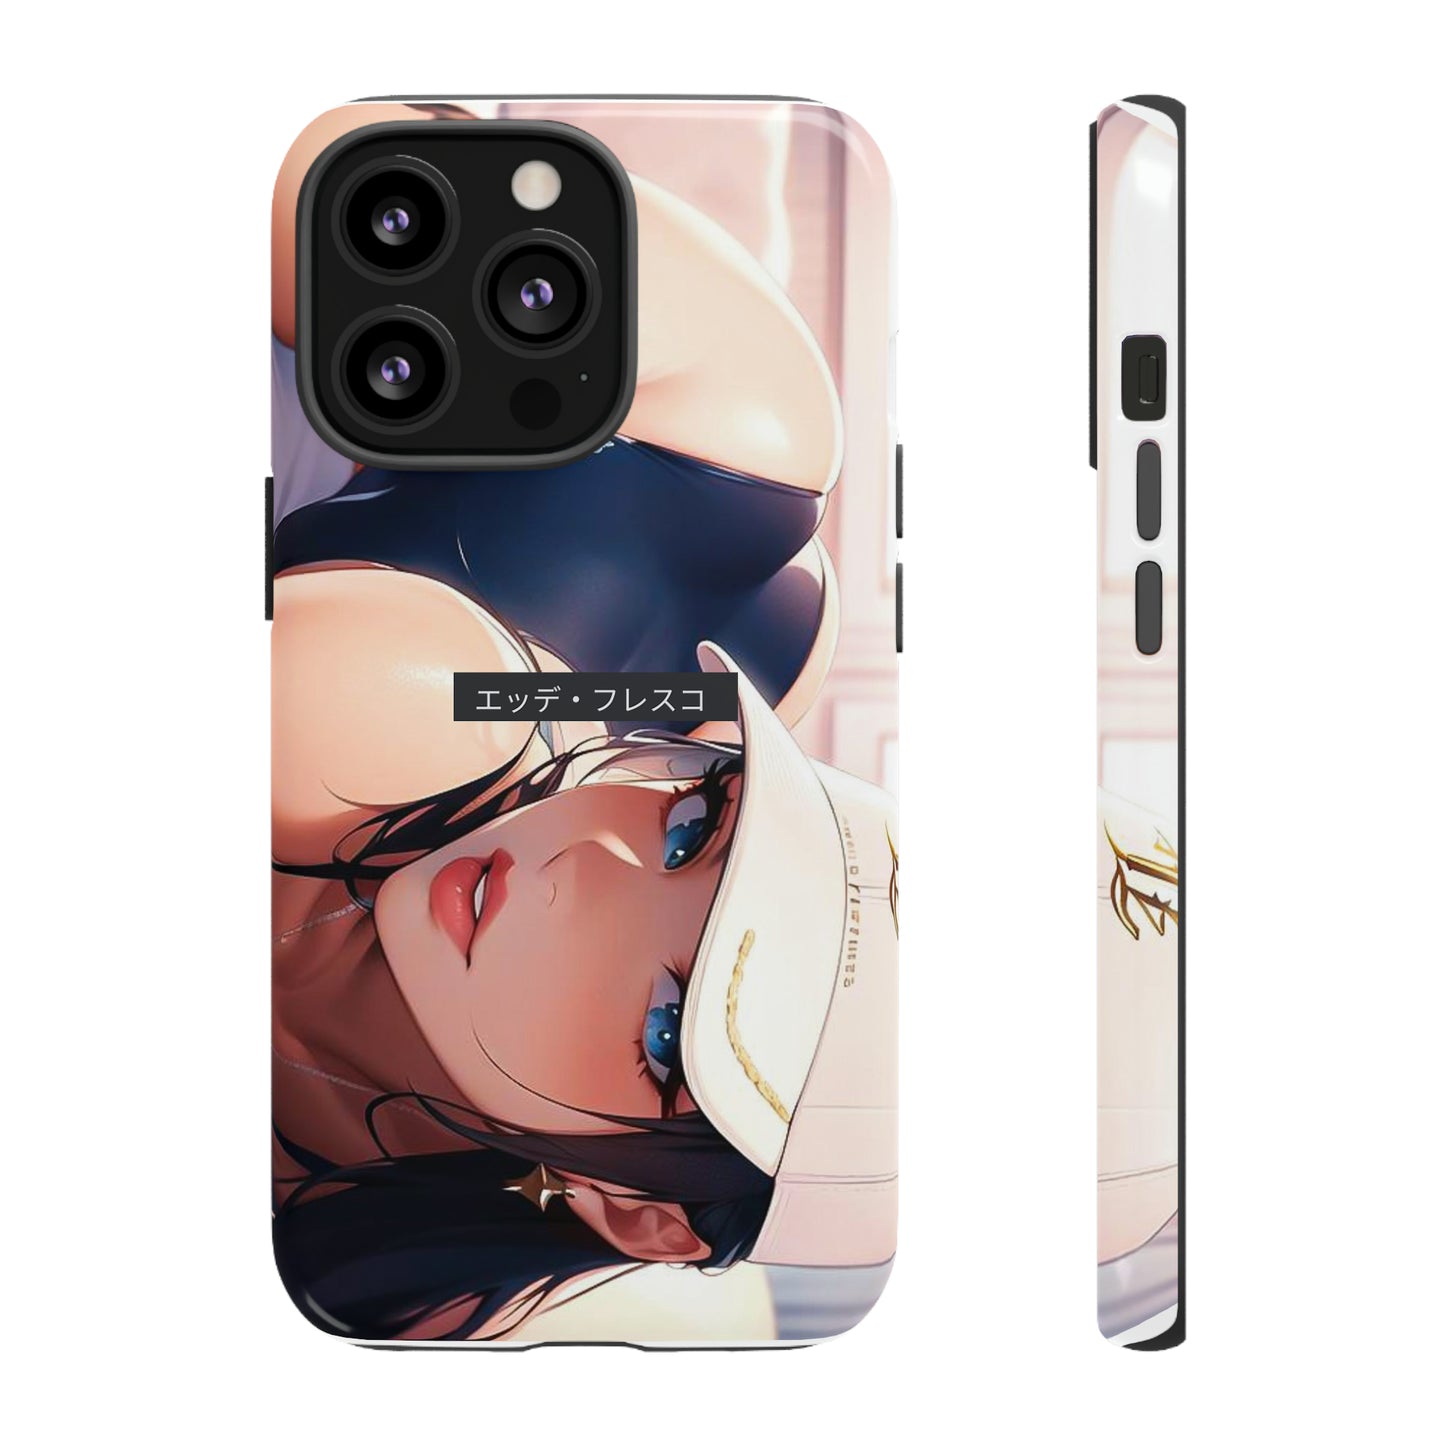 Anime Style Art Tough Cases- "She's too Kind"